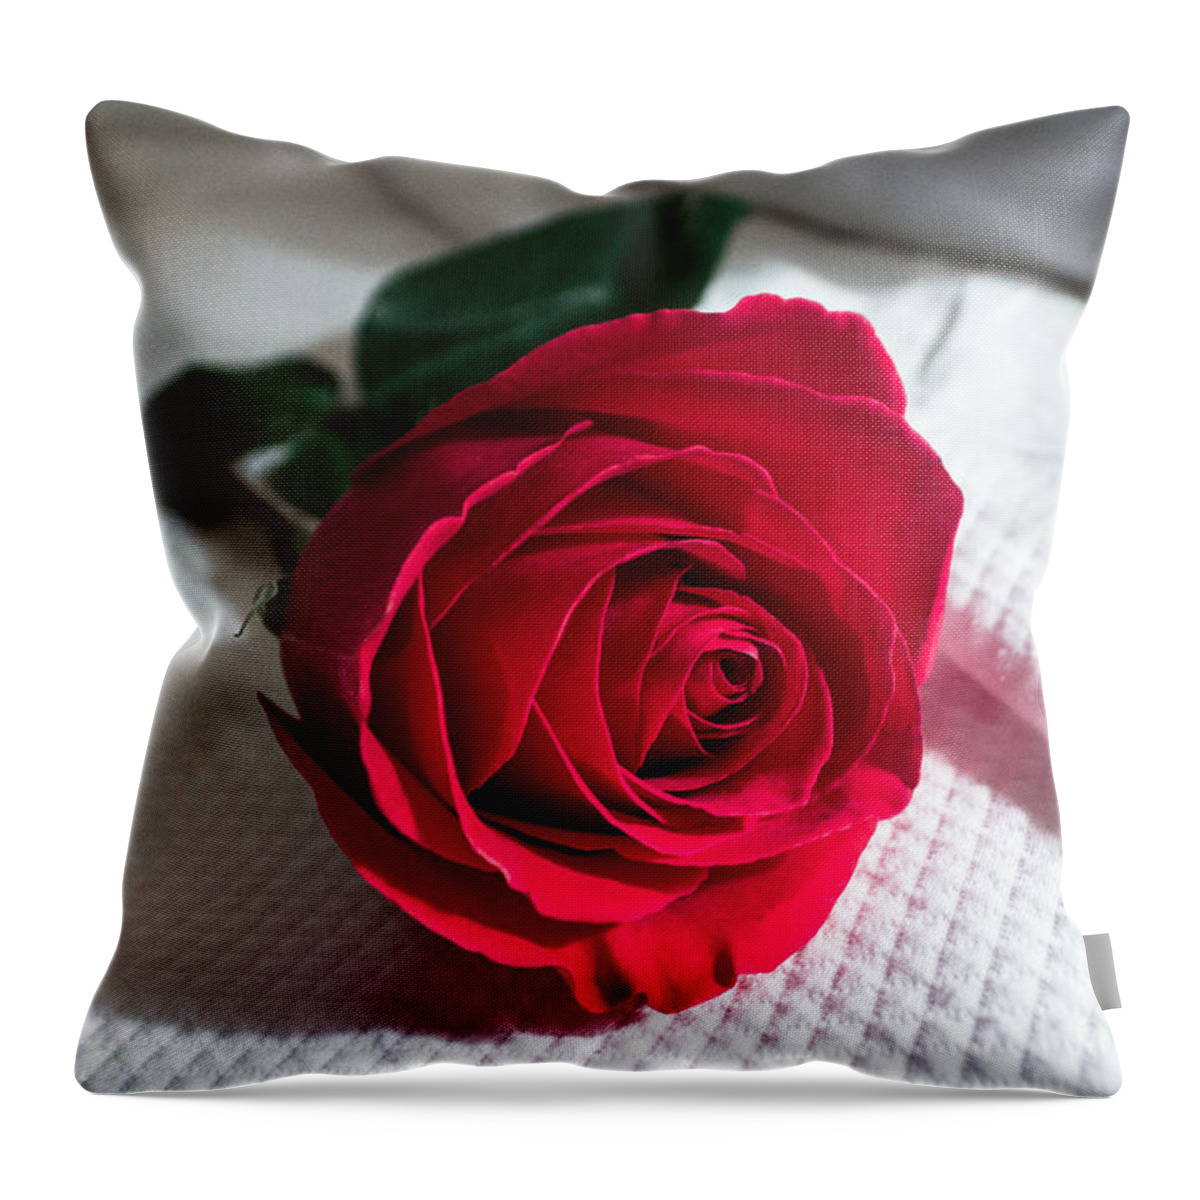 Rose Throw Pillow featuring the photograph Single Red Rose by Arlene Carmel